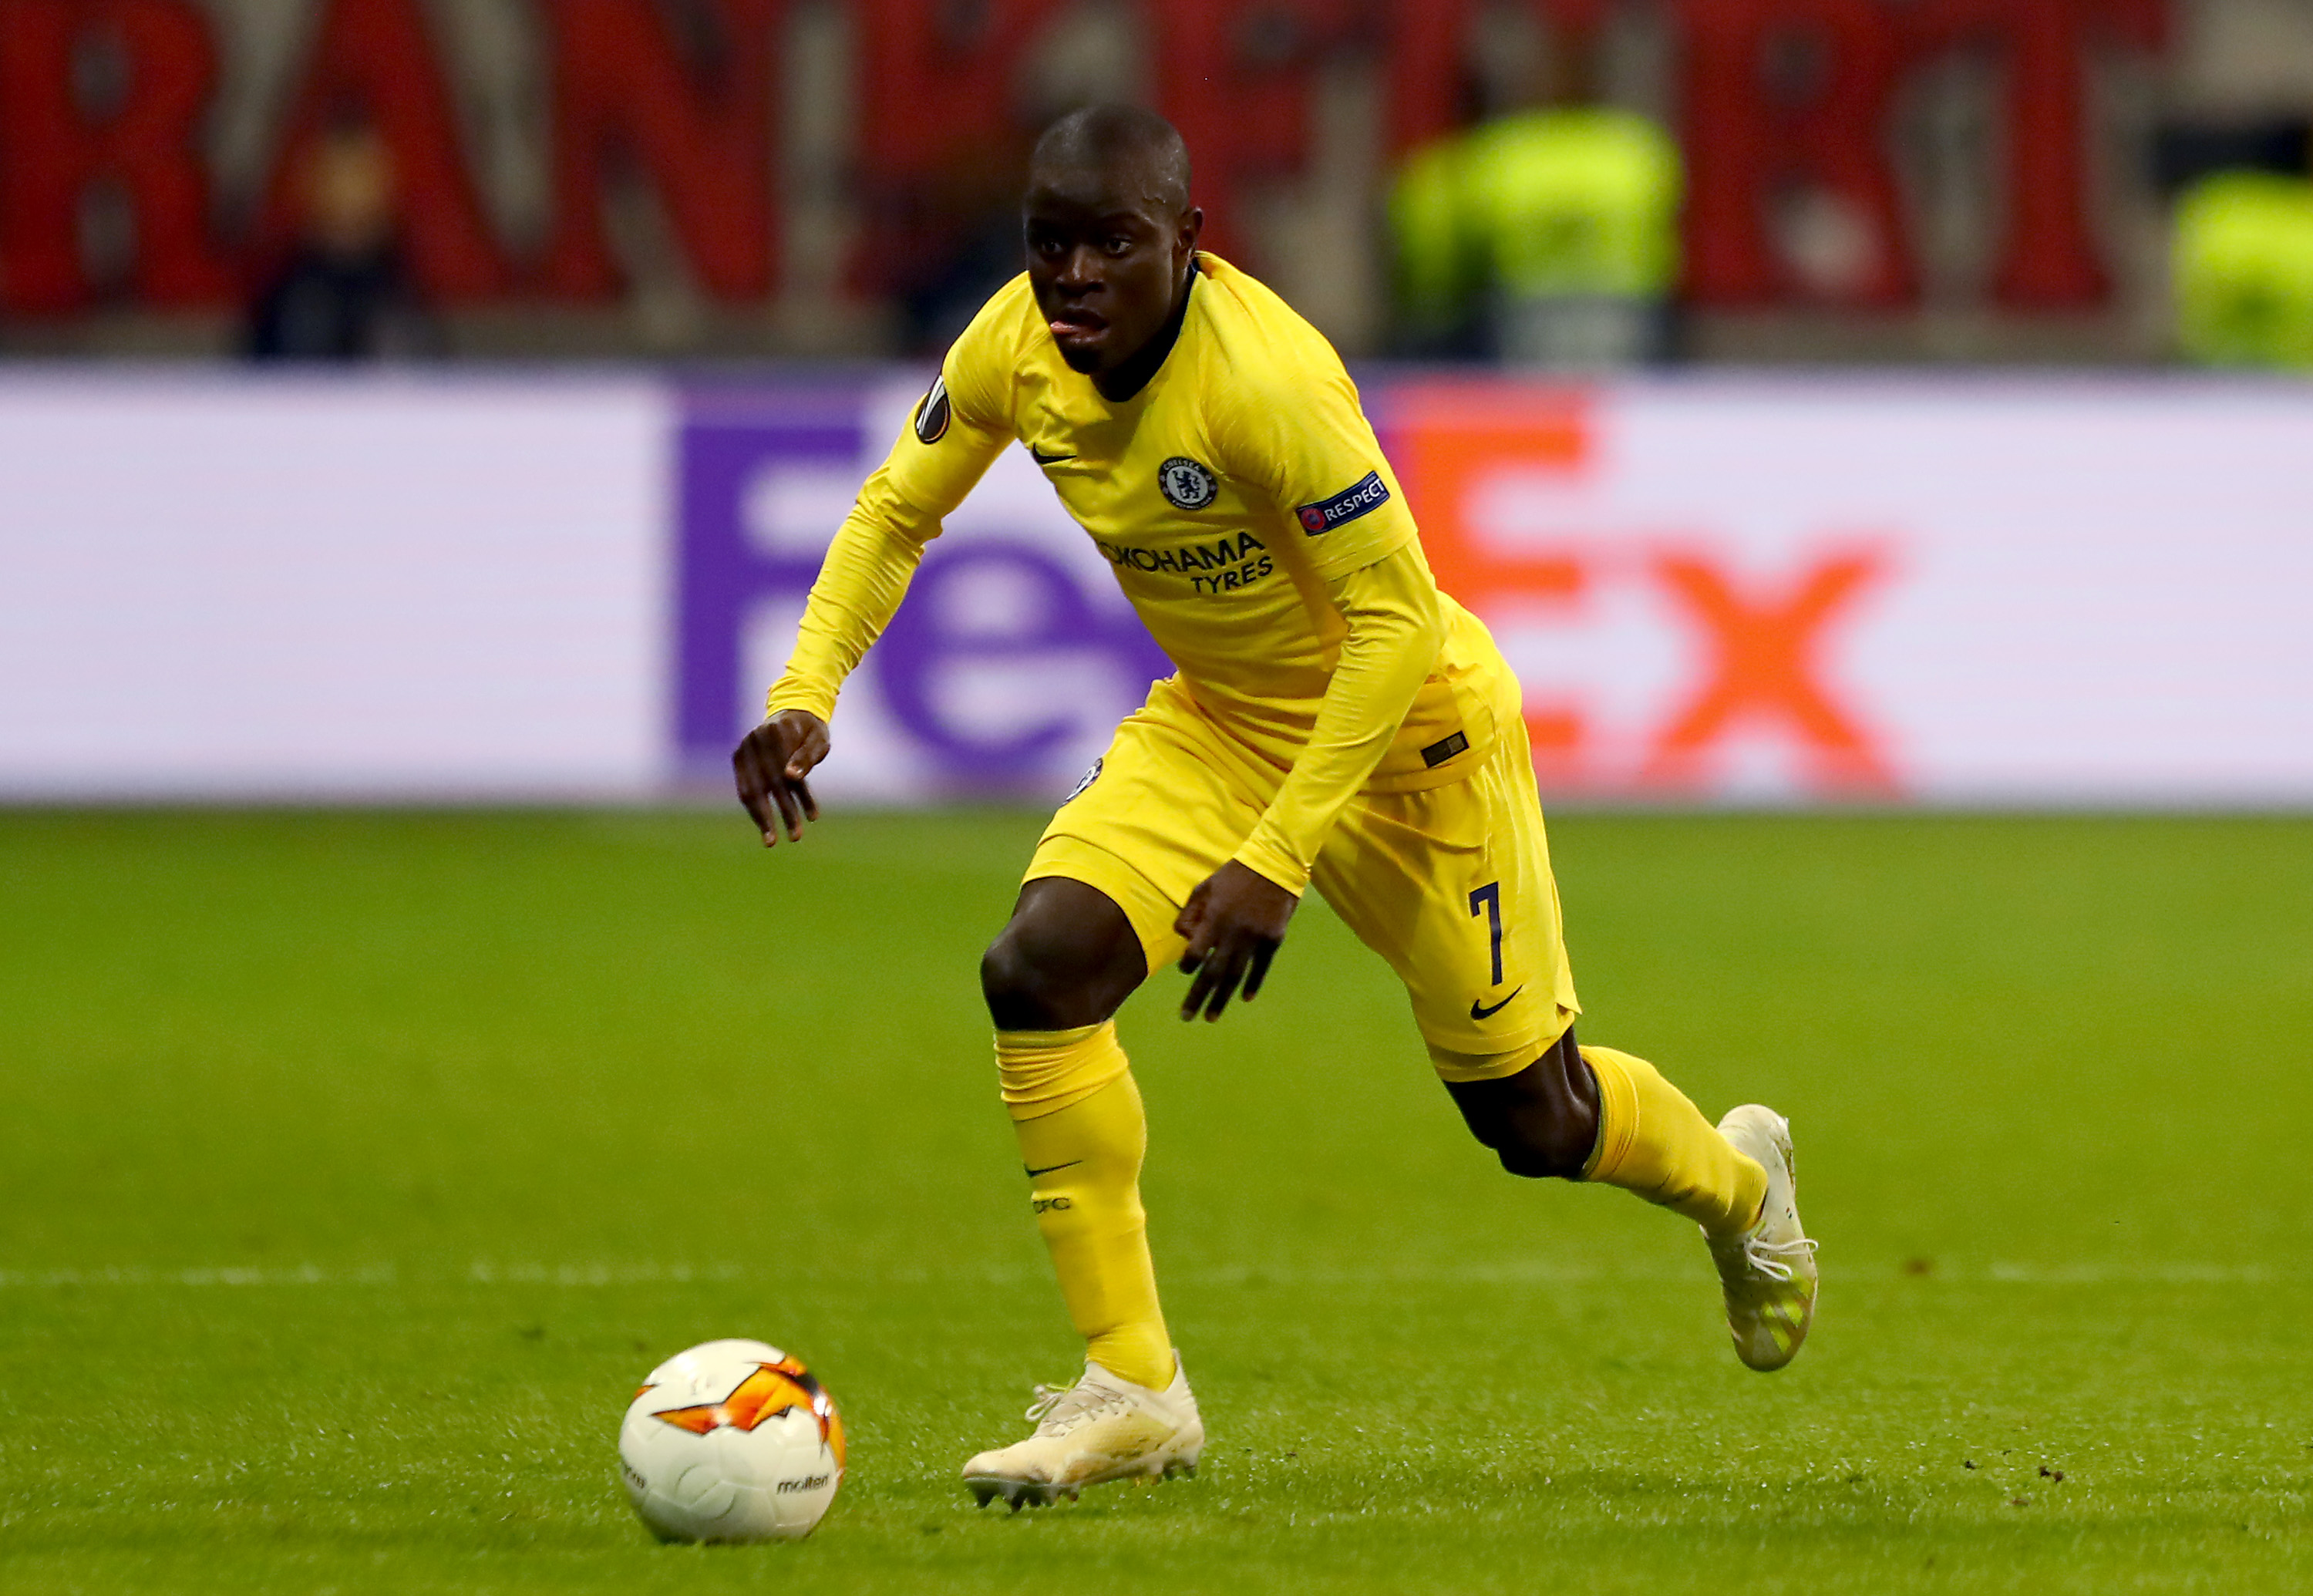 Will Kante resist a big money offer from PSG to remain at Chelsea? (Photo courtesy: AFP/Getty)